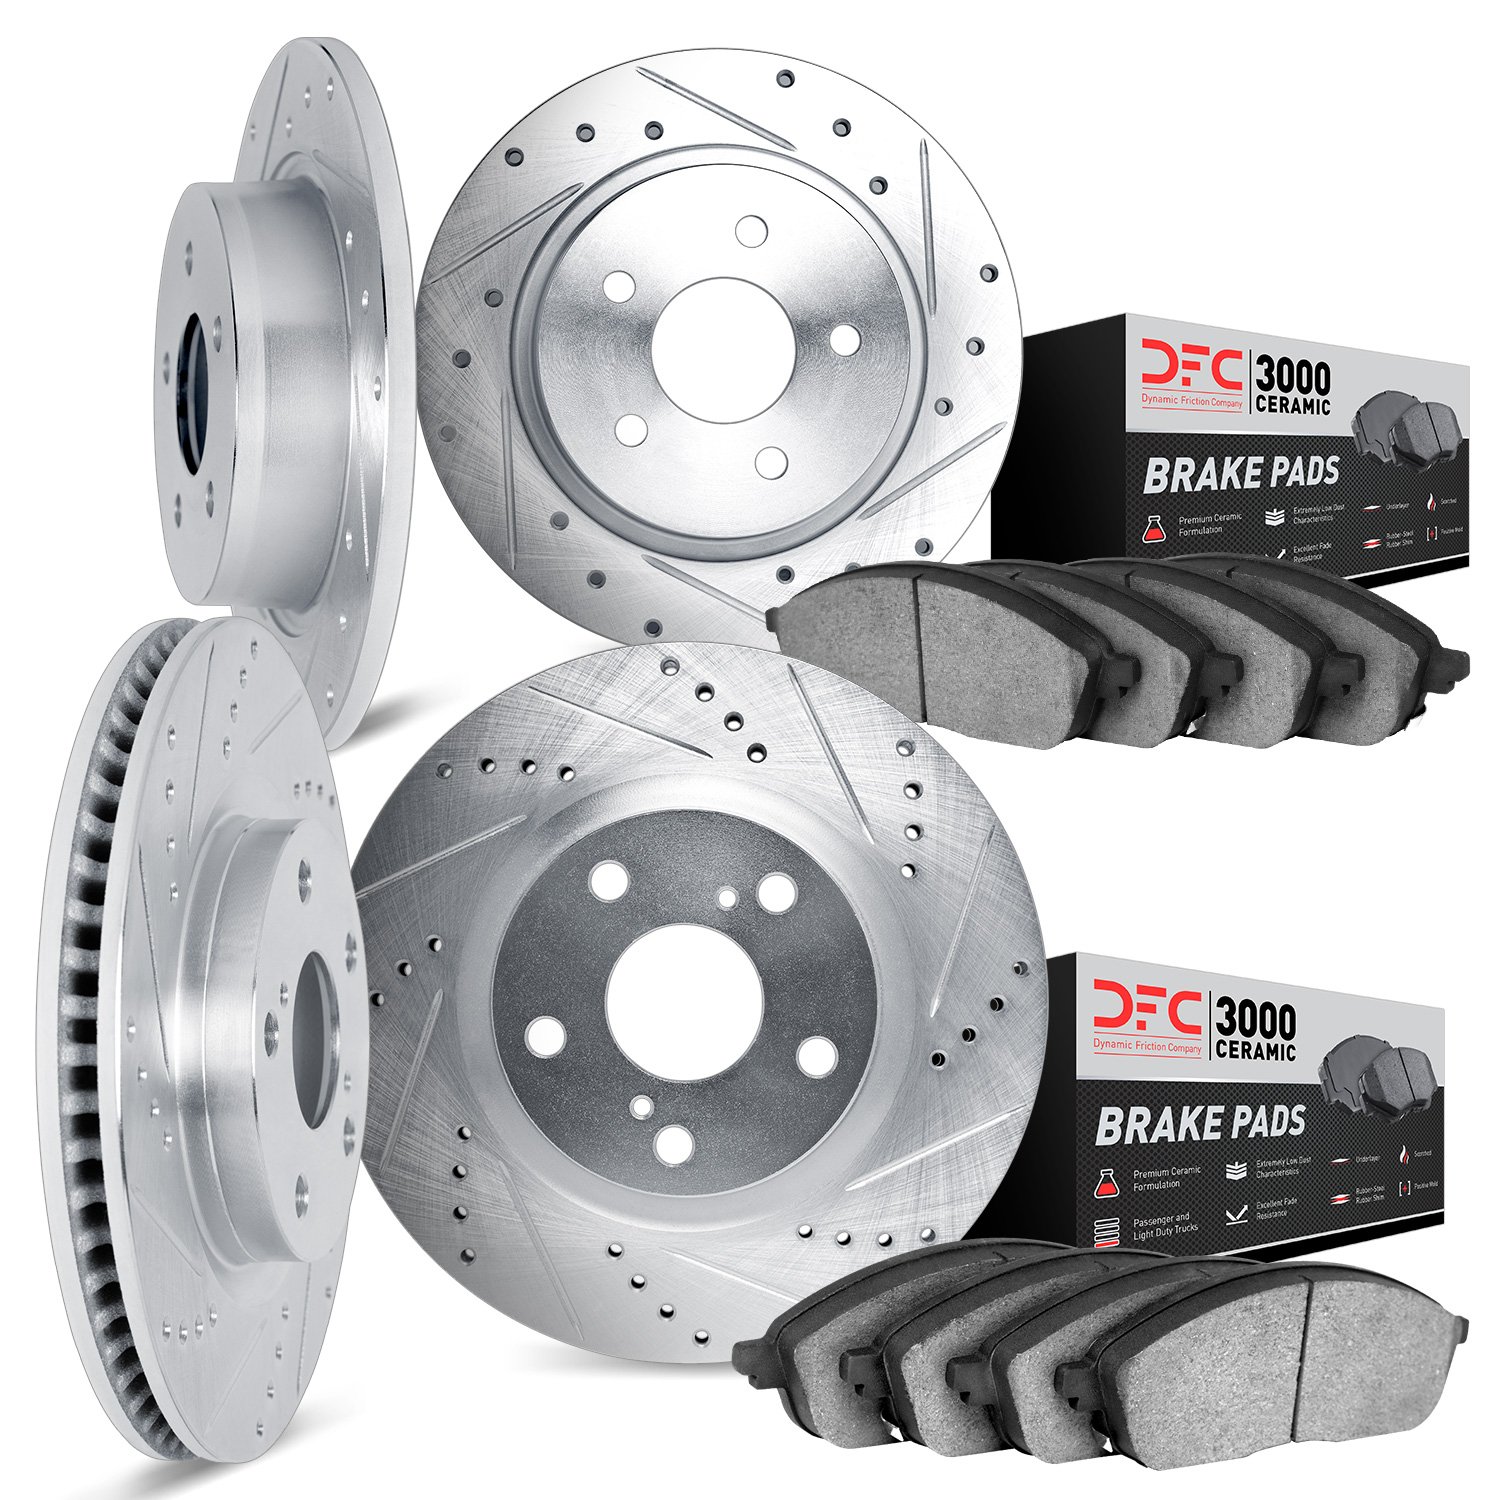 7304-80027 Drilled/Slotted Brake Rotor with 3000-Series Ceramic Brake Pads Kit [Silver], 2004-2013 Ford/Lincoln/Mercury/Mazda, P